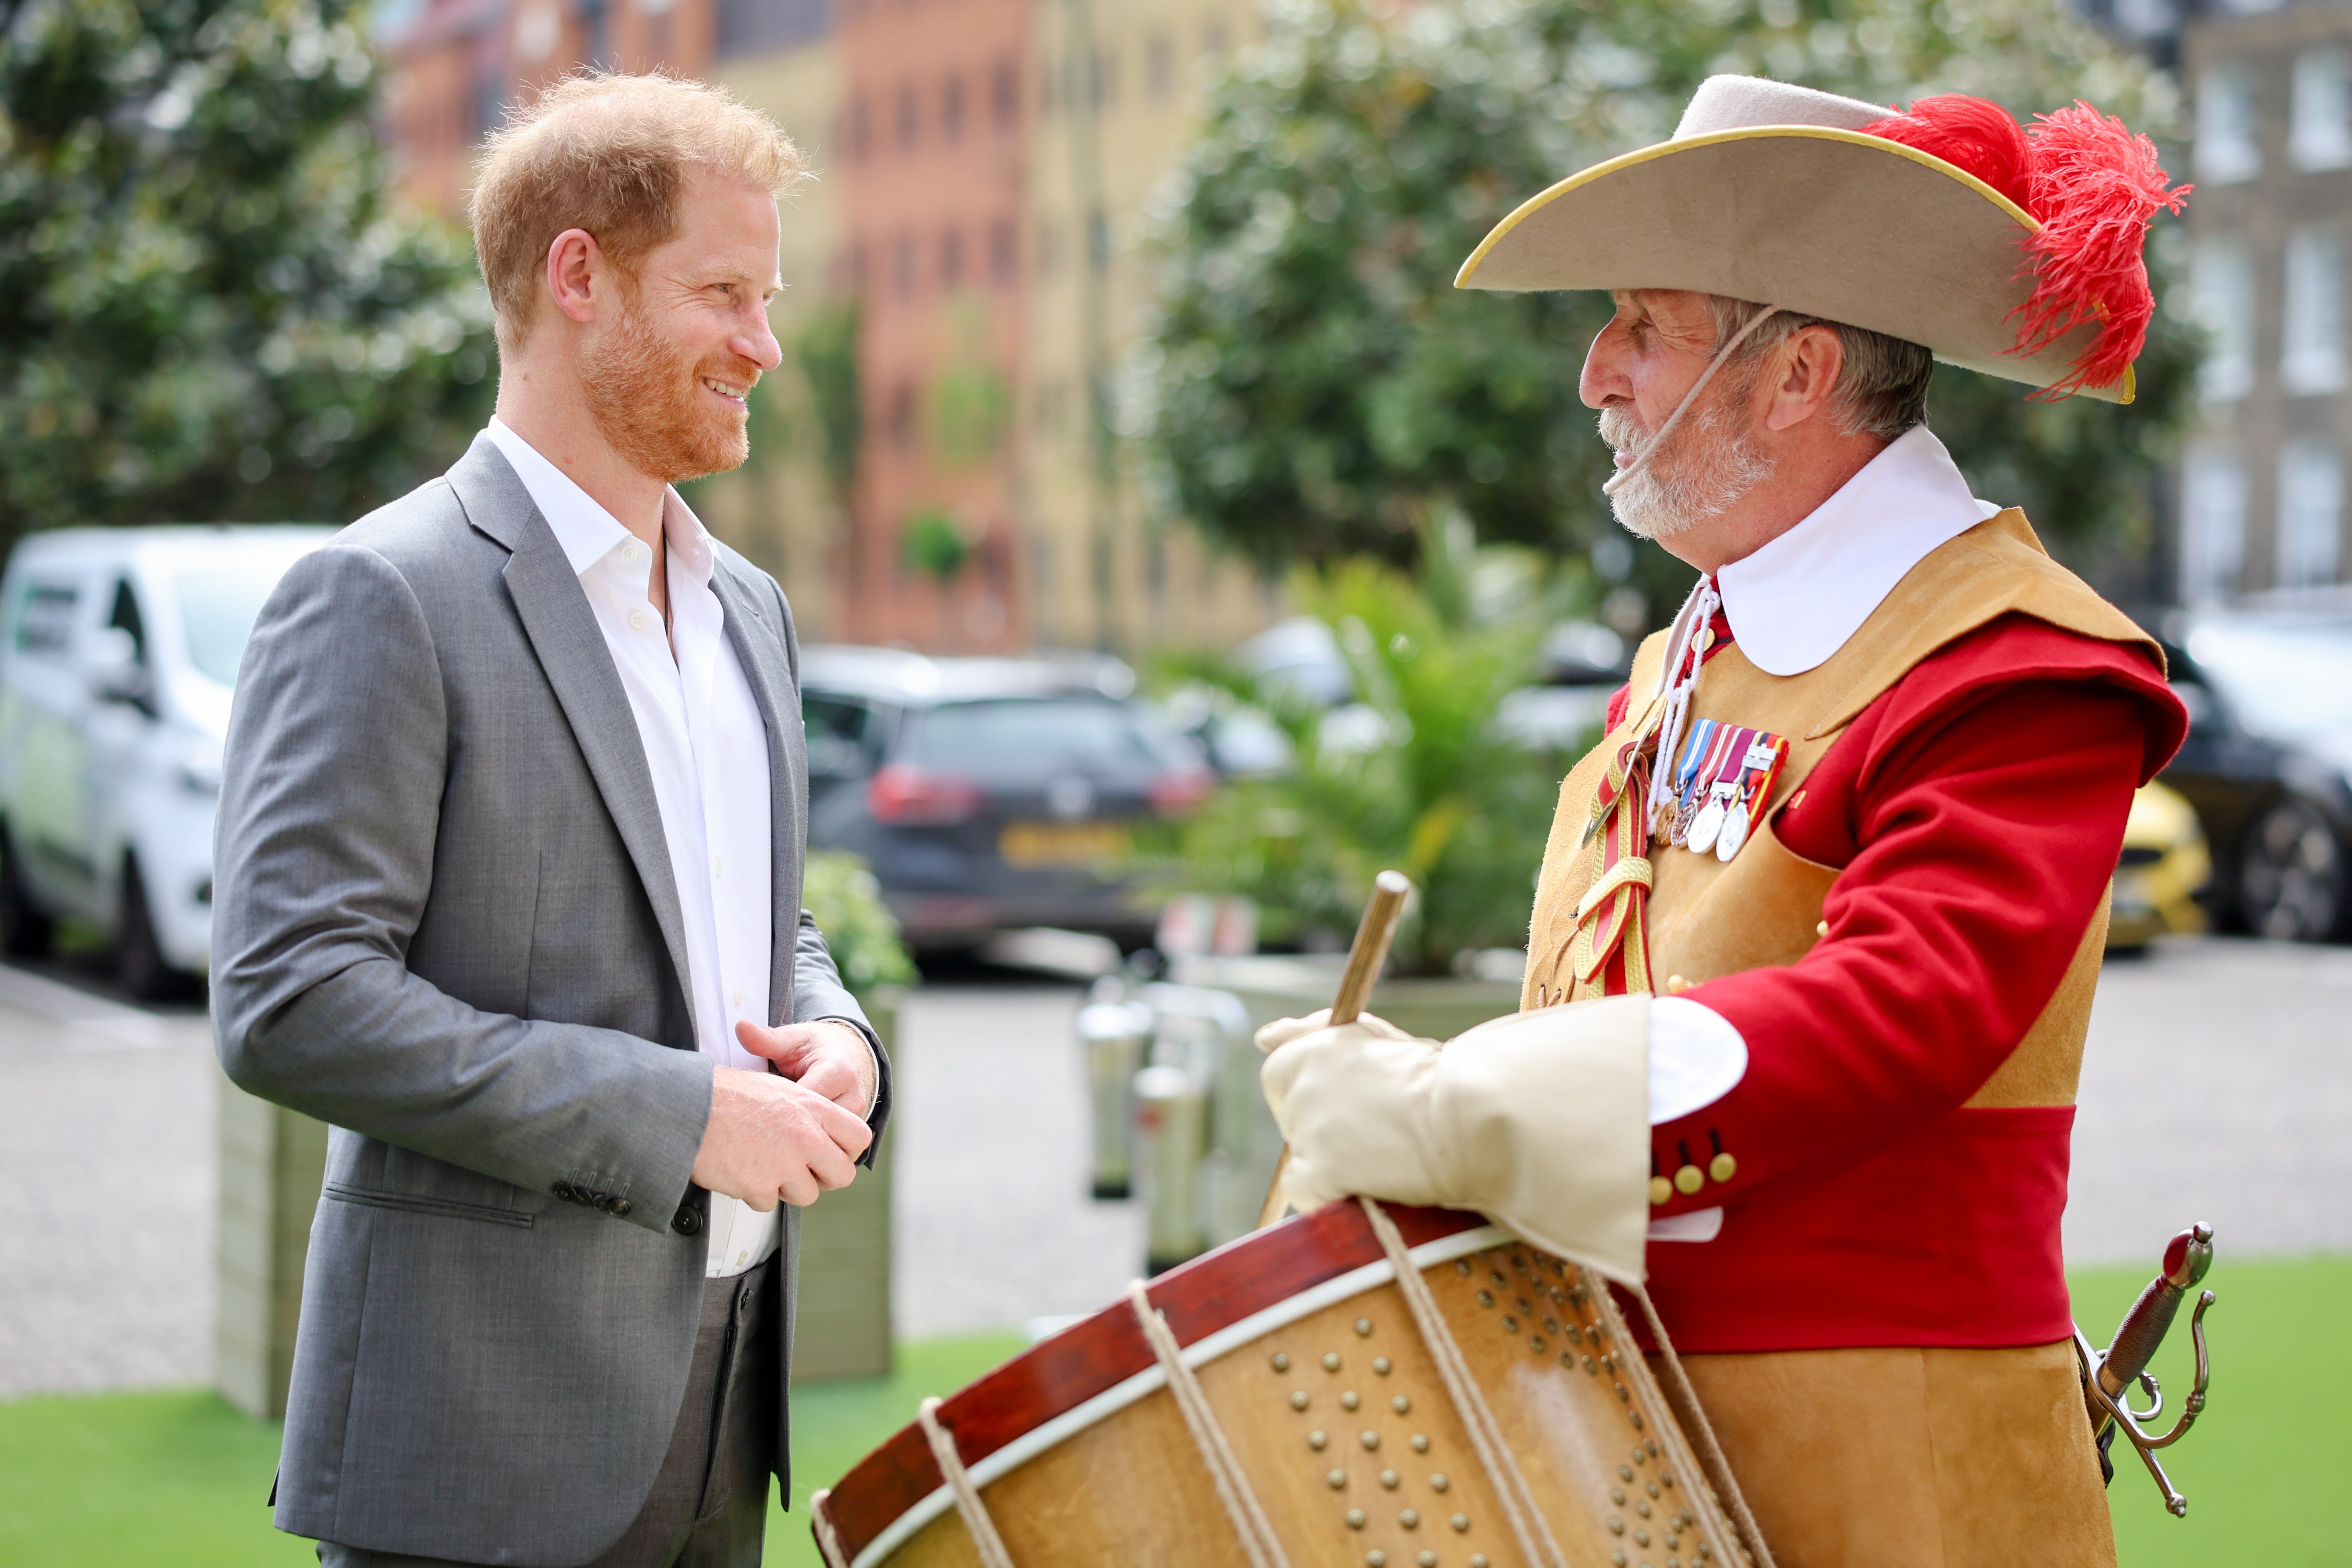 Prince Harry is currently in the UK celebrating the 10th anniversary of the Invictus Games